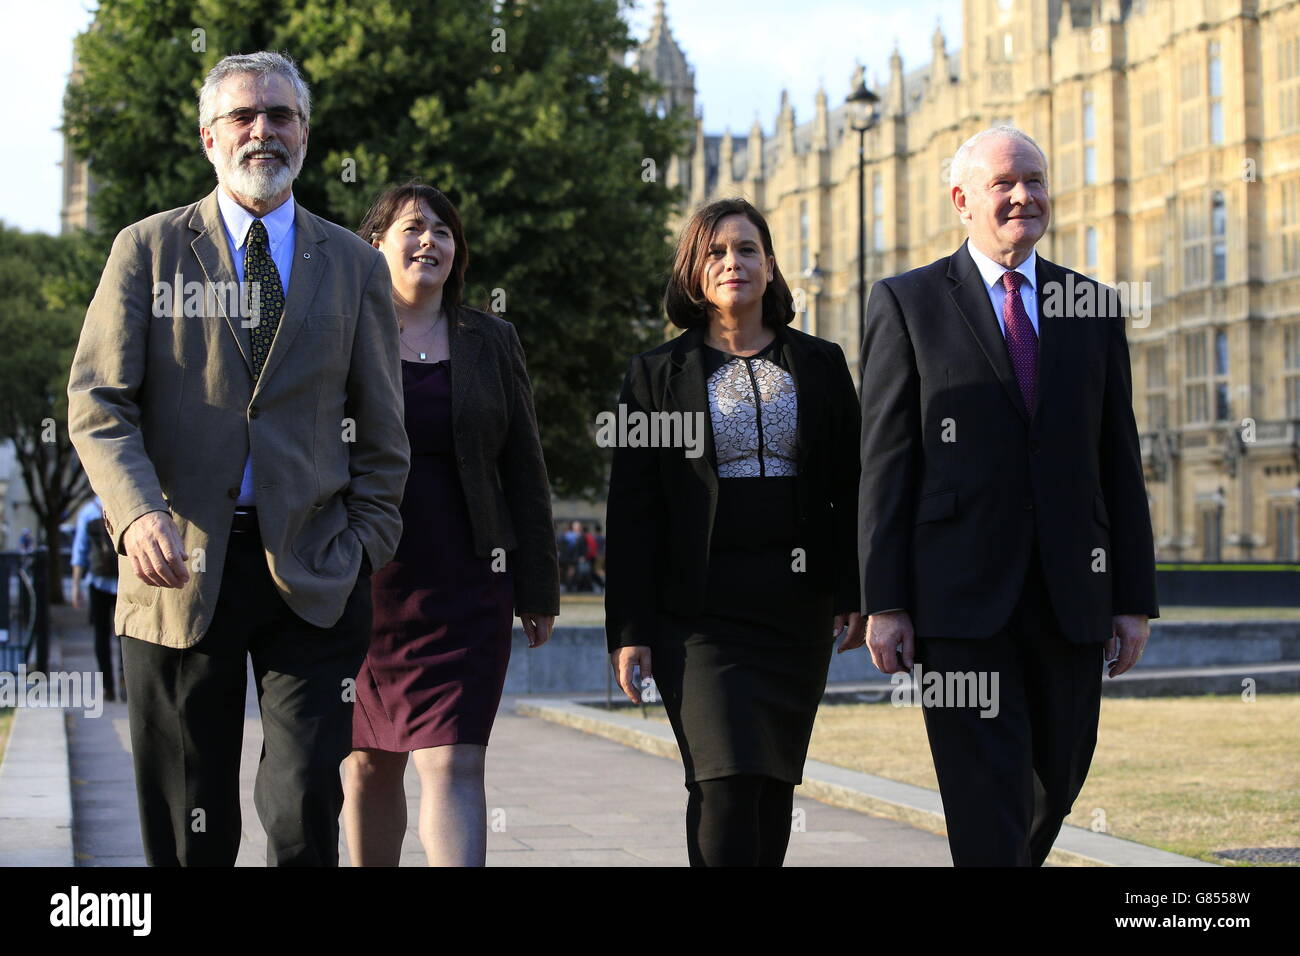 in's President Gerry Adams, Michelle Gildernew, Vice President Mary Lou McDonald and deputy First Minister of Northern Ireland Martin McGuinness outside the Palace of Westminster, London. Stock Photo